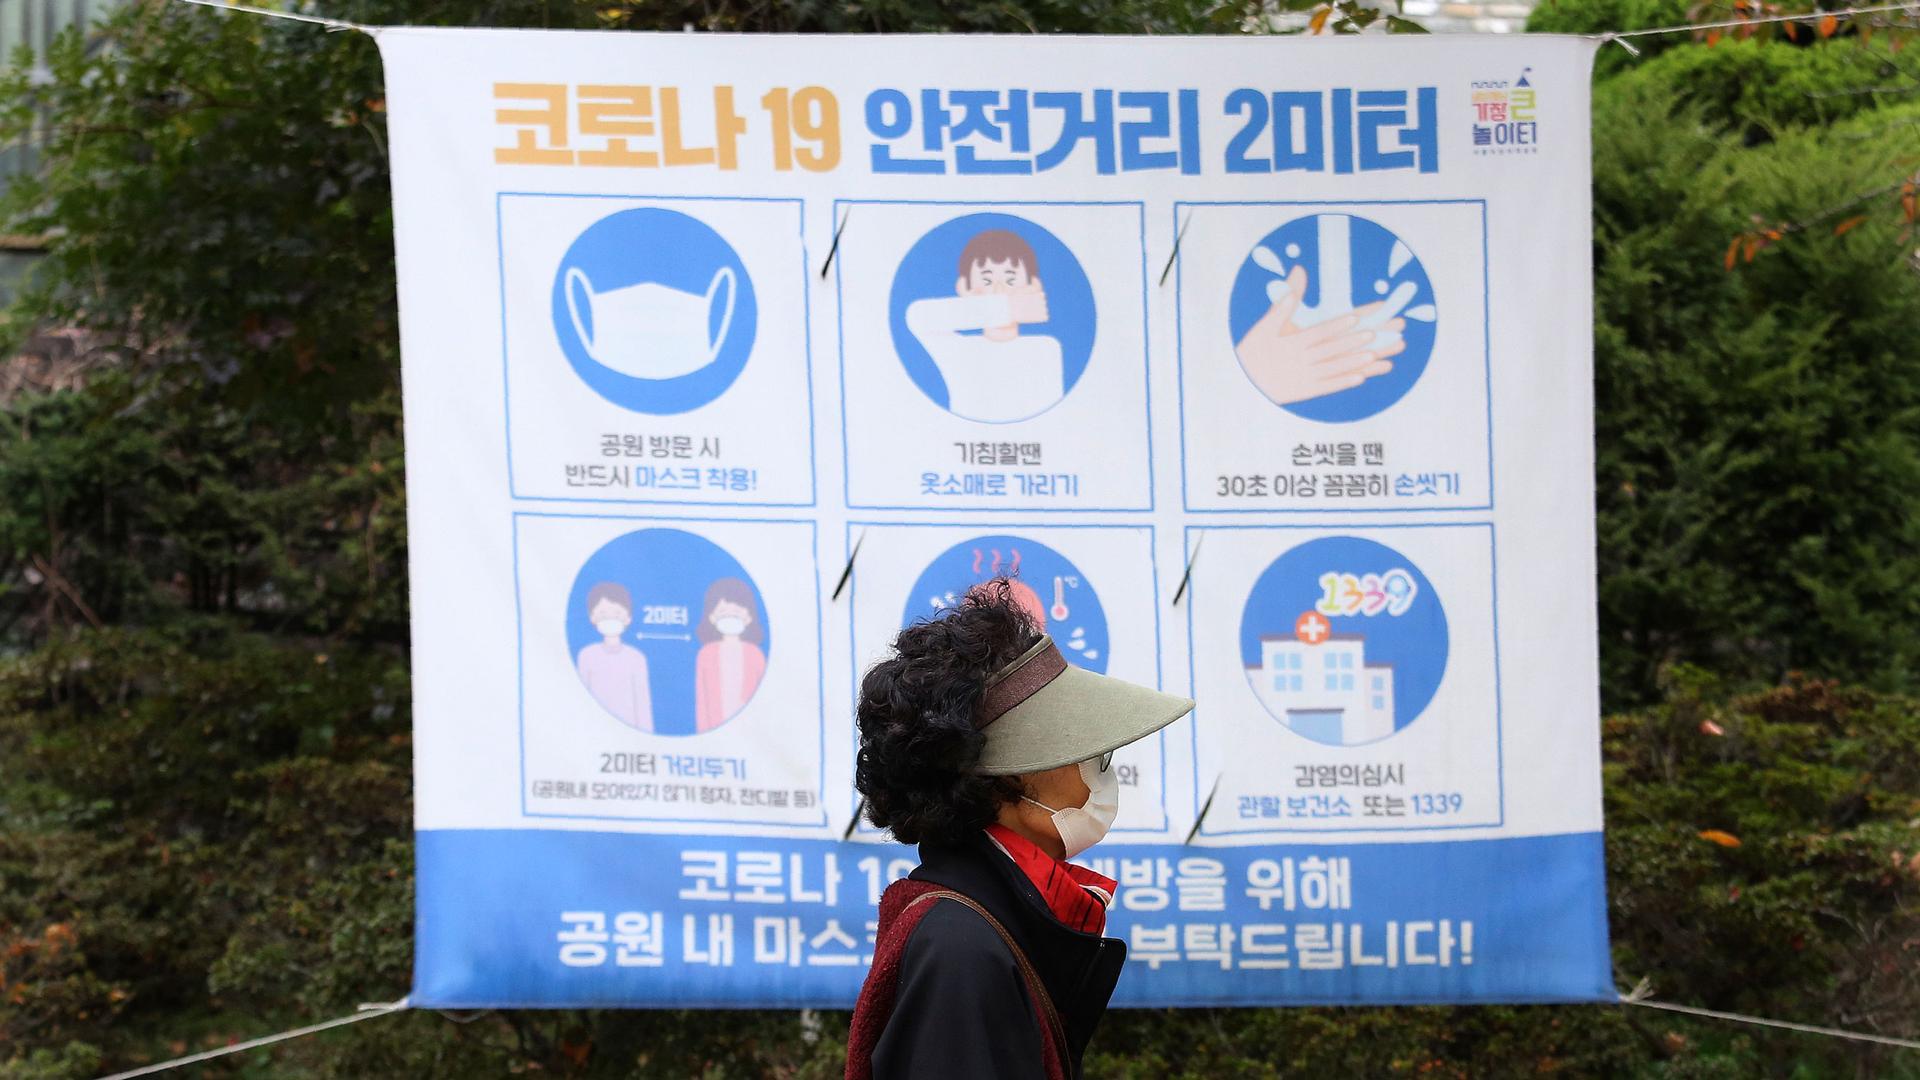 A woman is shown wearing a visor and face mask while walking past a poster with guidance on stopping the spread of the coronavirus.